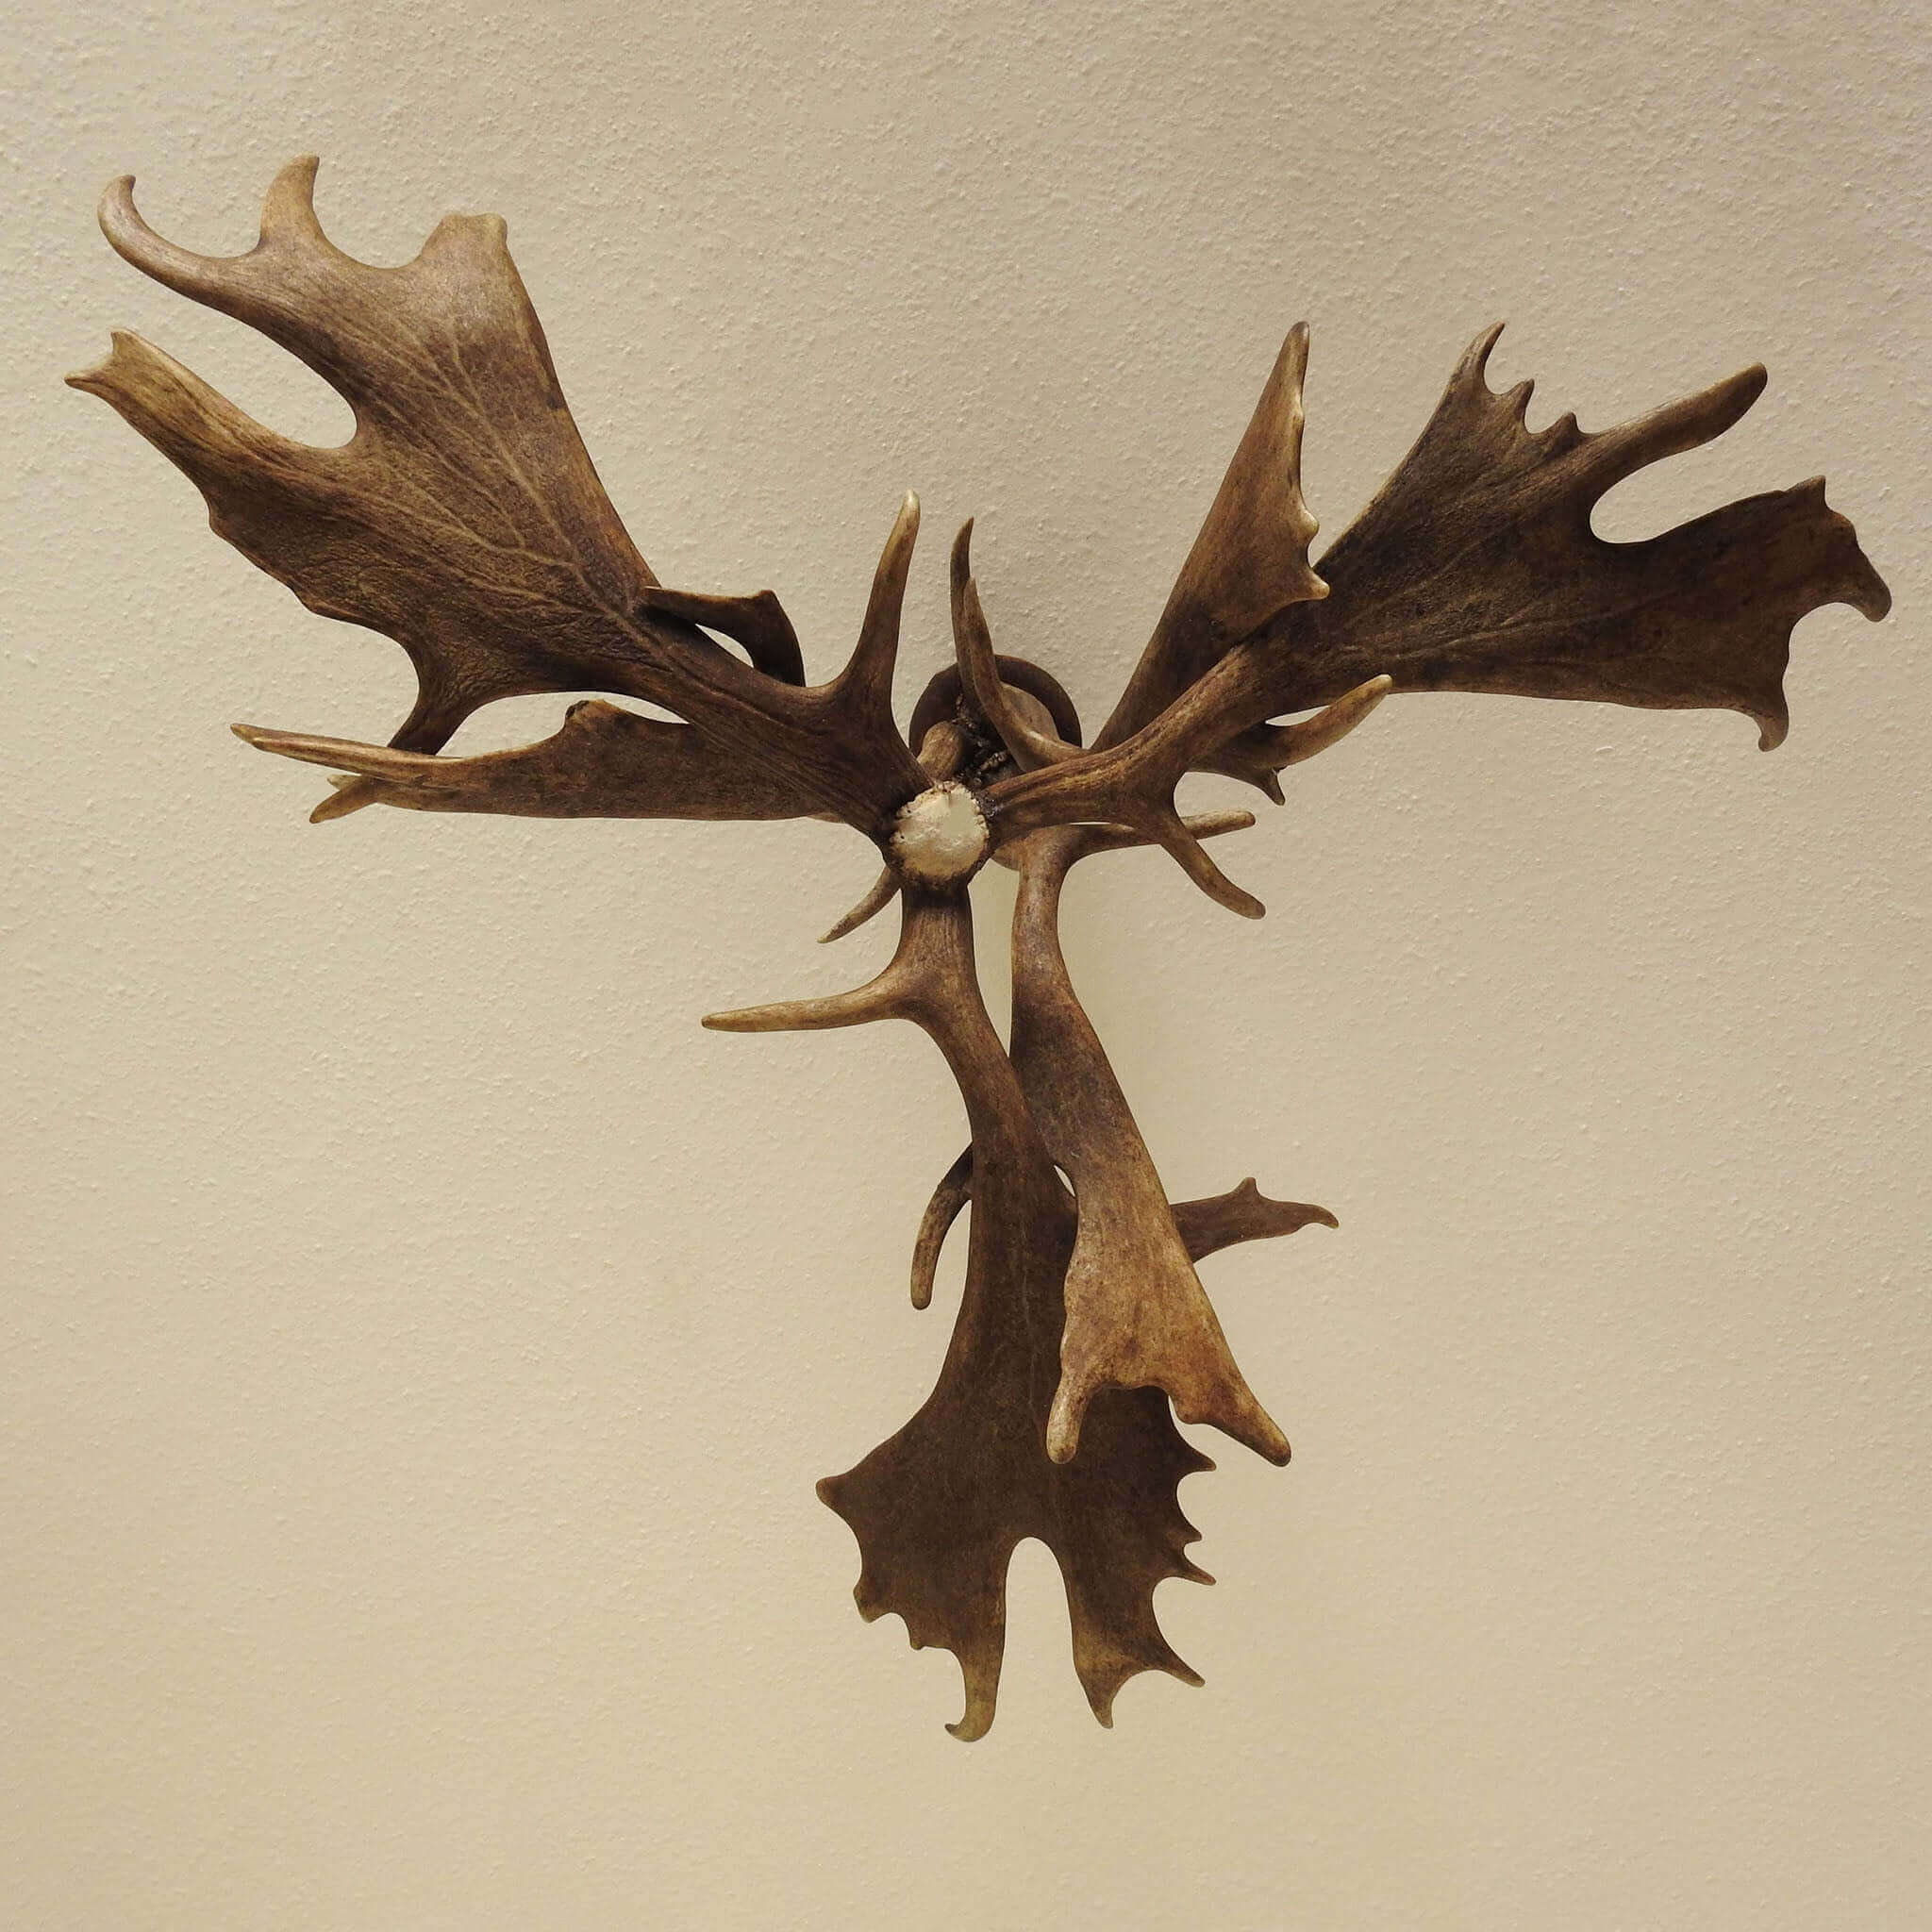 Farmhouse chandelier made of real antlers, view from the bottom.